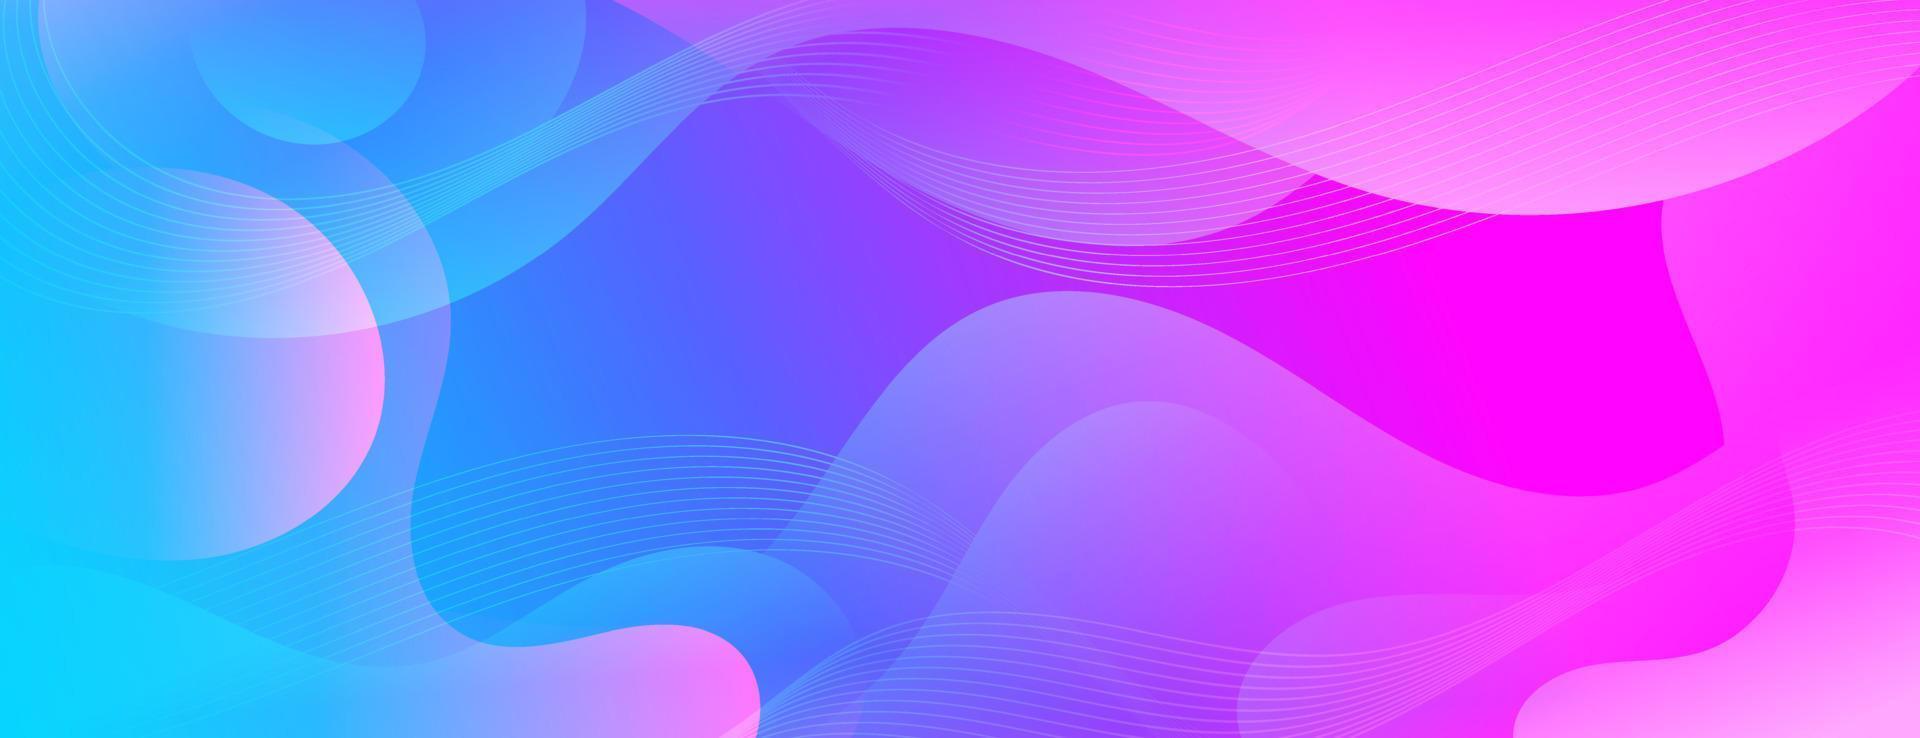 Abstract Gradient Purple and blue Fluid Wave Background vector